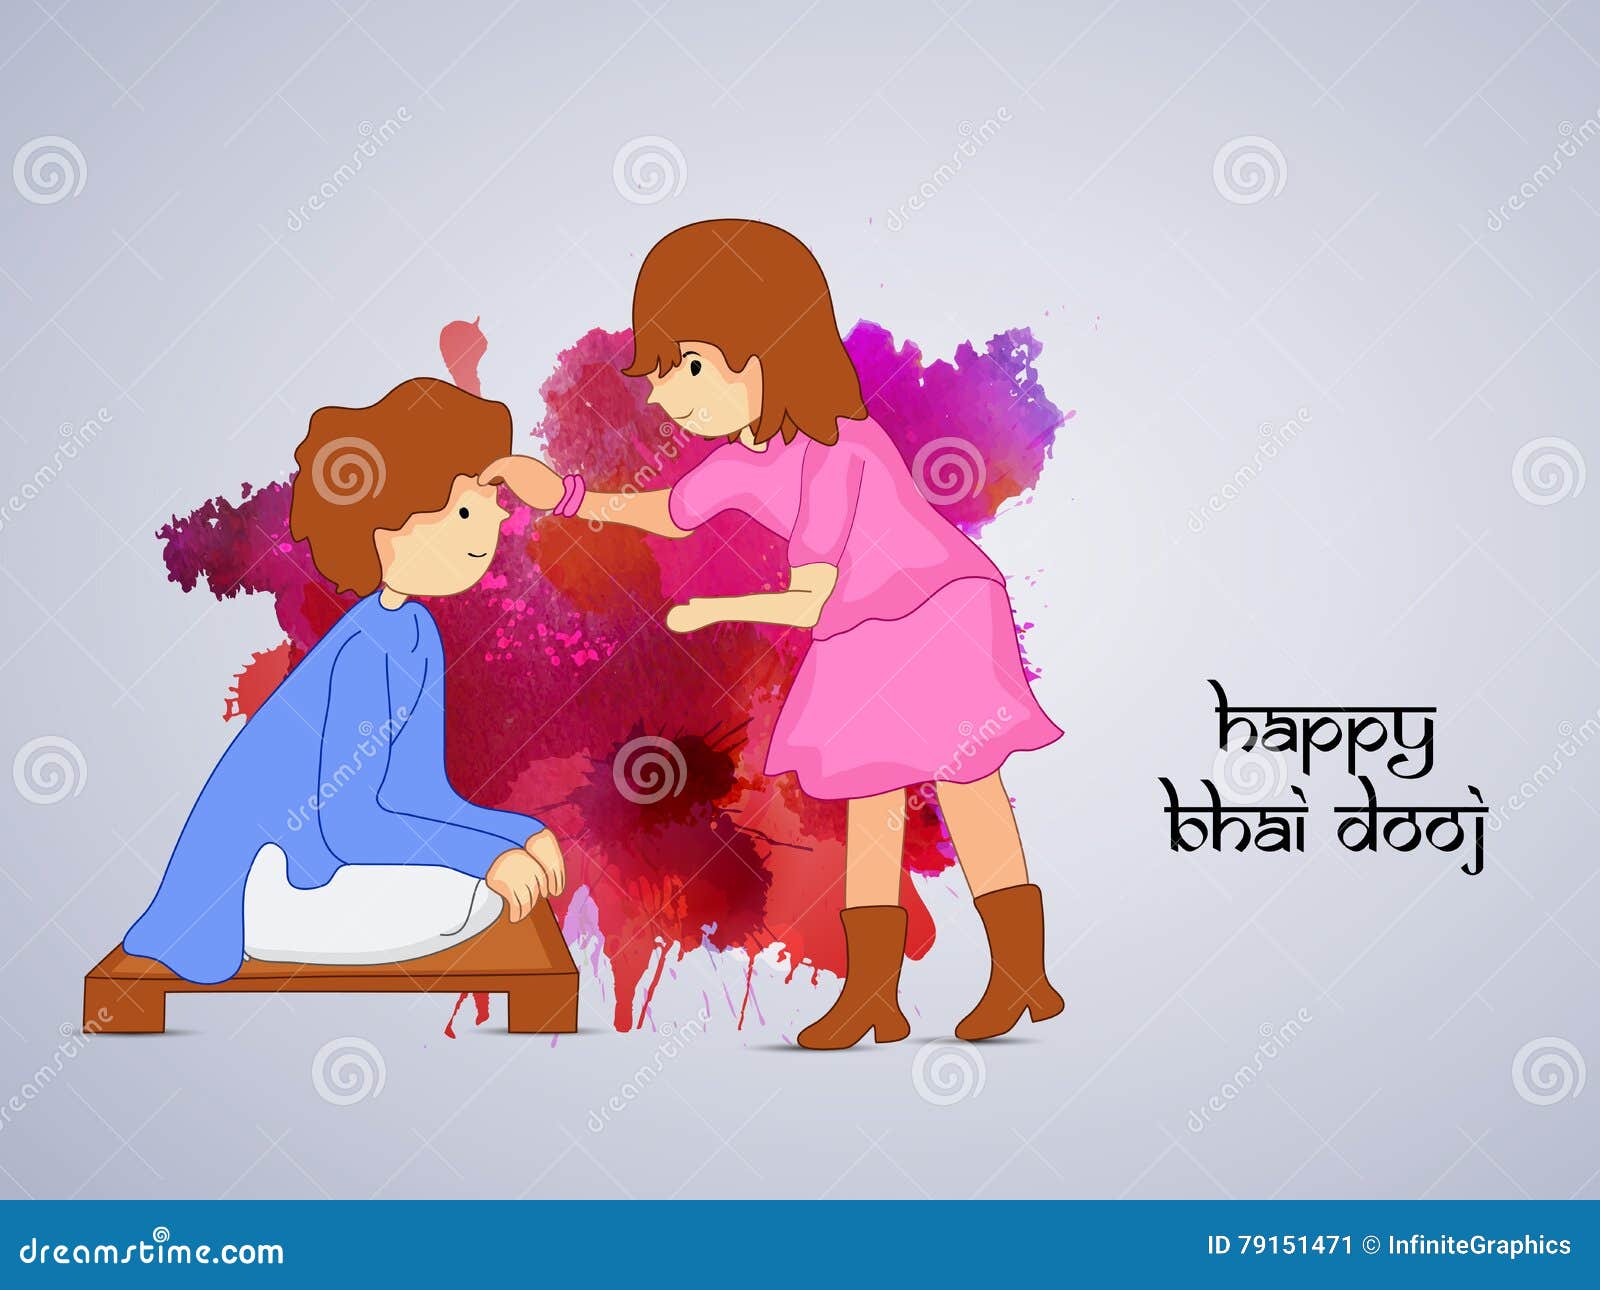 Happy Bhai Dooj 2021: Best Wishes, Greetings, Quotes, WhatsApp Messages,  Images For Your Loved Ones